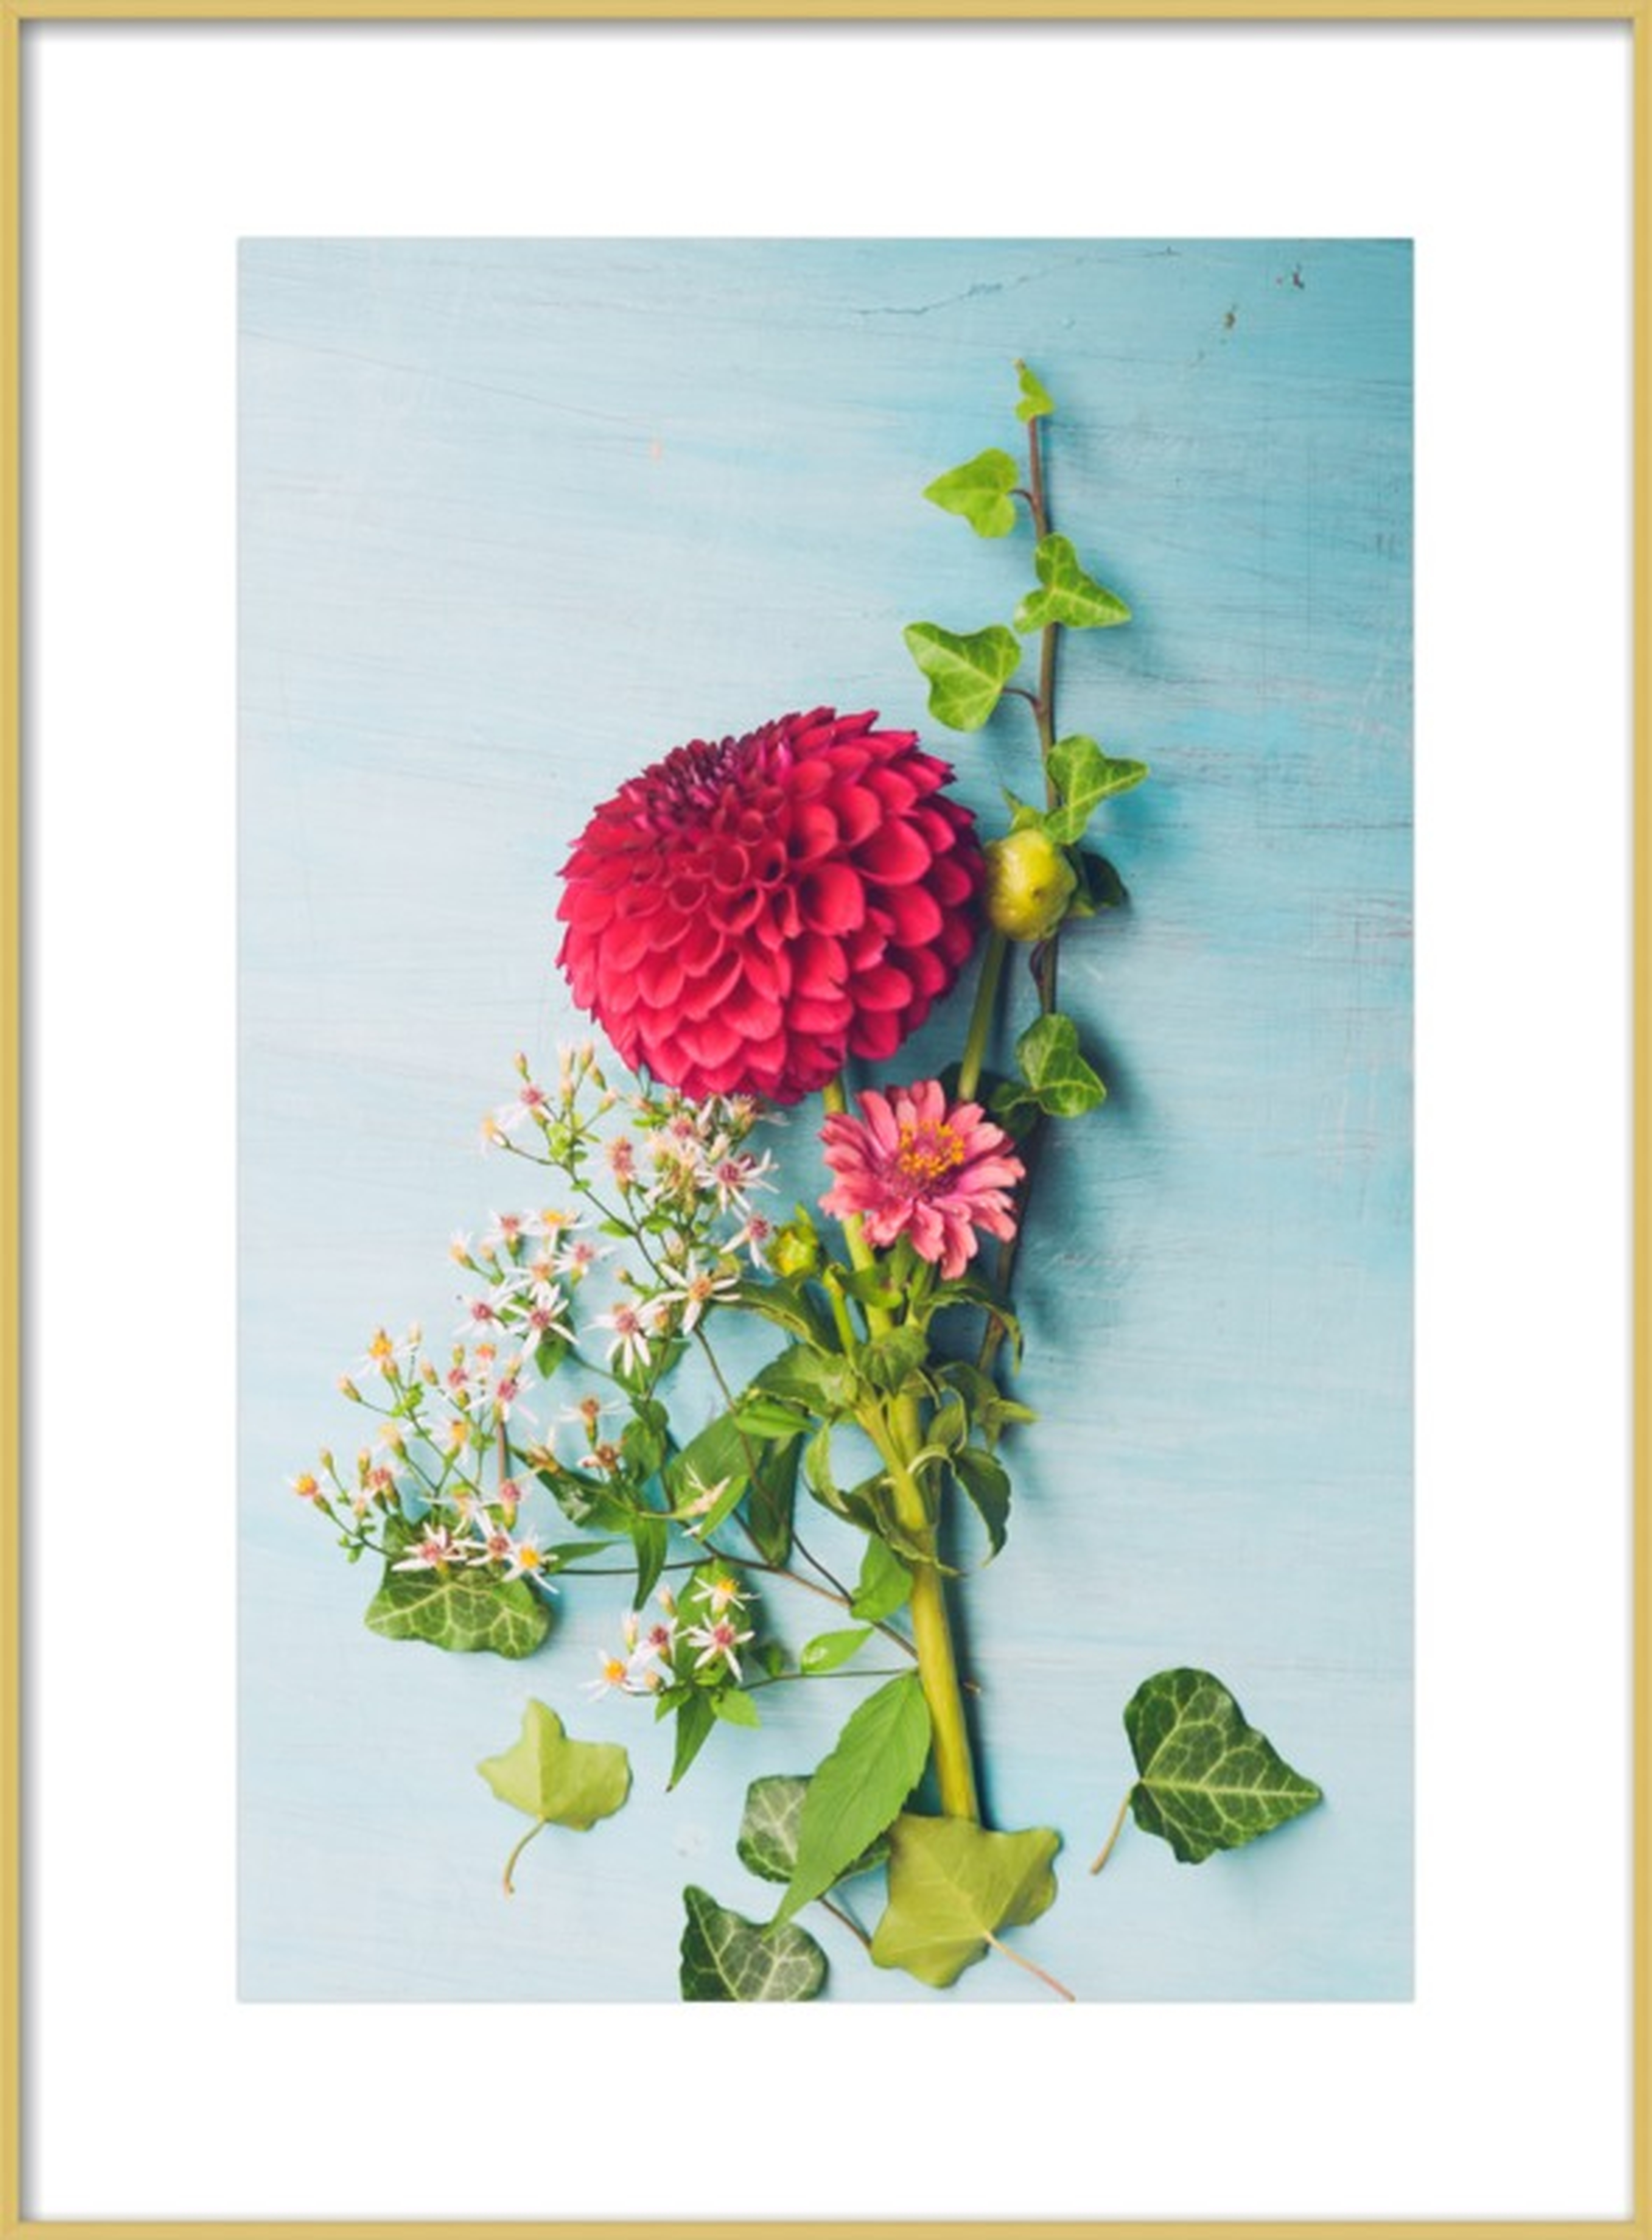 Summer Bloomed in Her Heart by Olivia Joy StClaire for Artfully Walls - Artfully Walls